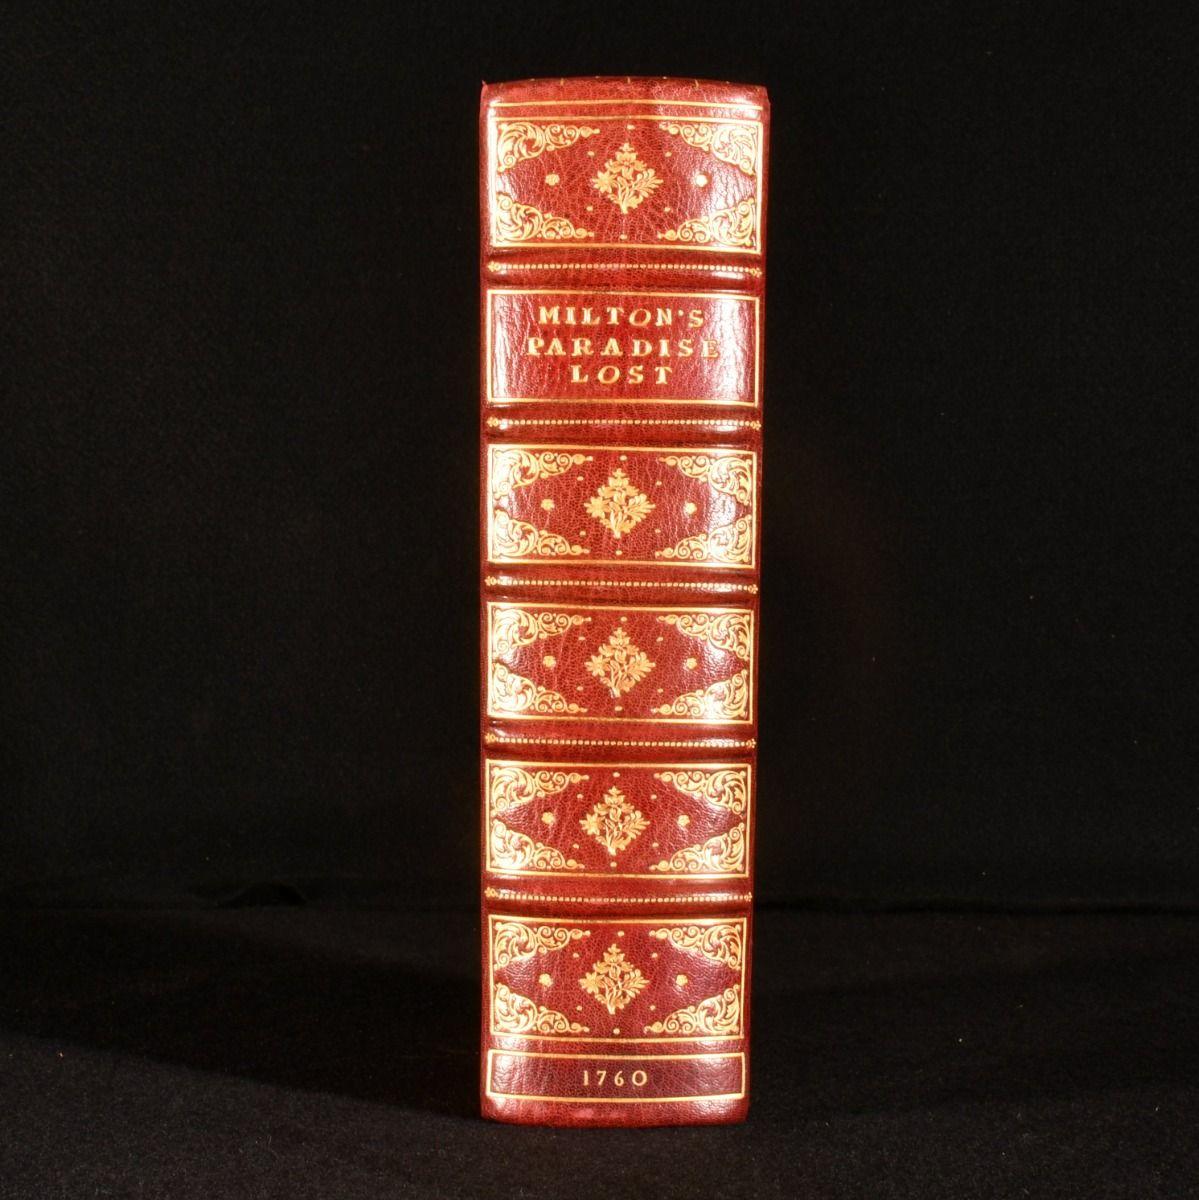 A beautiful Baskerville edition of John Milton's 'Paradise Lost' and 'Paradise Regain'd', both epic poems bound here in one volume.

A Baskerville edition.

Complete as two volumes bound in one.

ESTC citation number T134228 and N11290 - 'Paradise